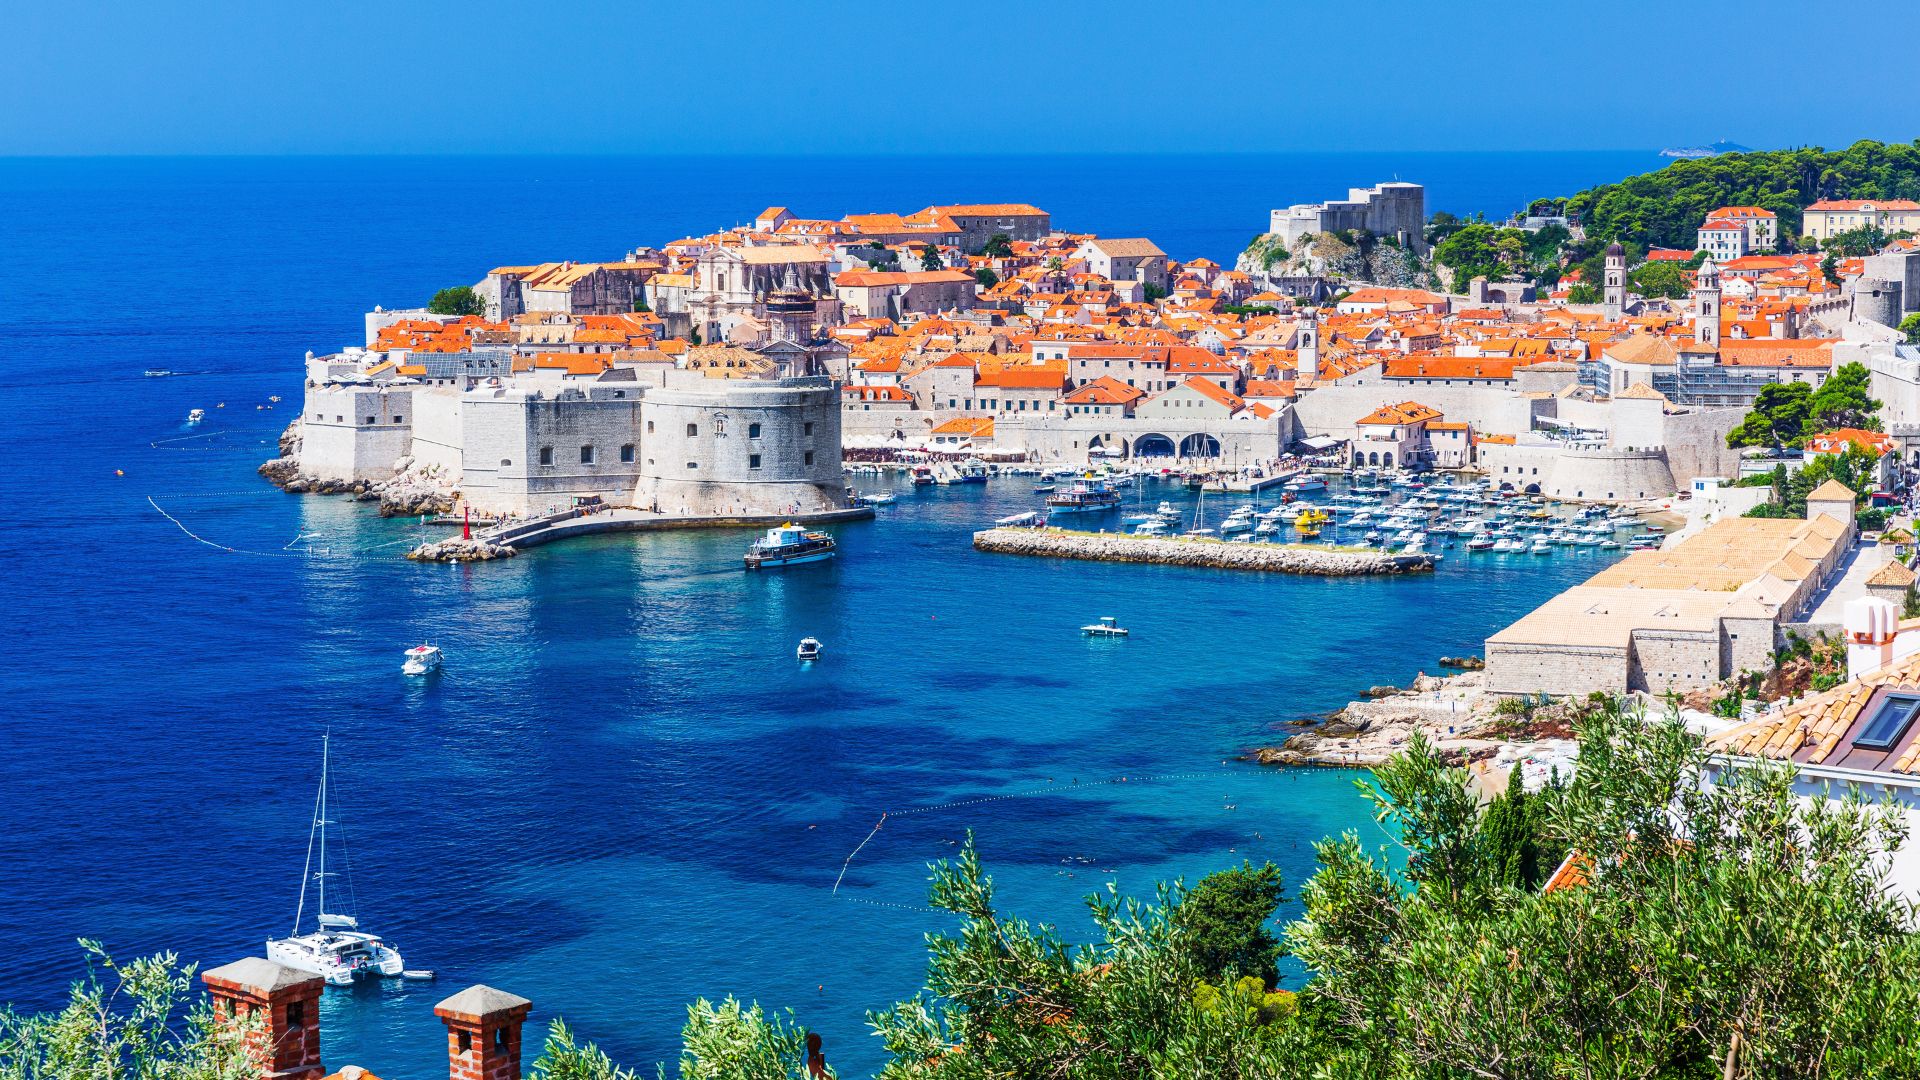 The Independent published: These are the best places in Croatia, you must visit them